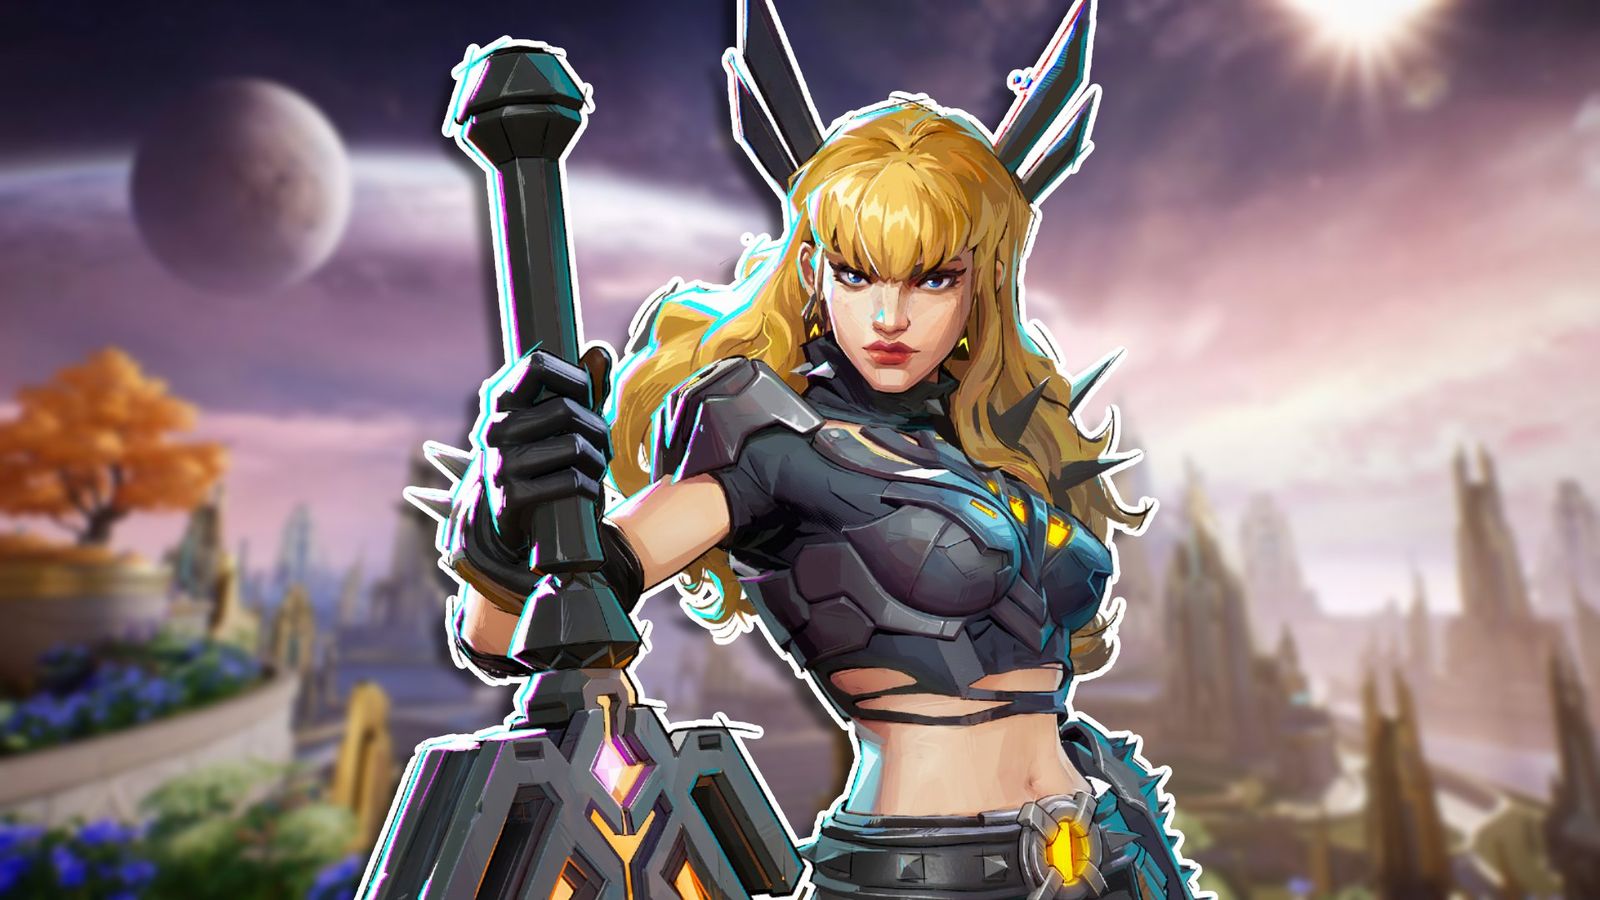 Magik from Marvel Rivals posing with her greatsword in her right hand, pointing downwards, placed on a blurred background of the Asgard map.